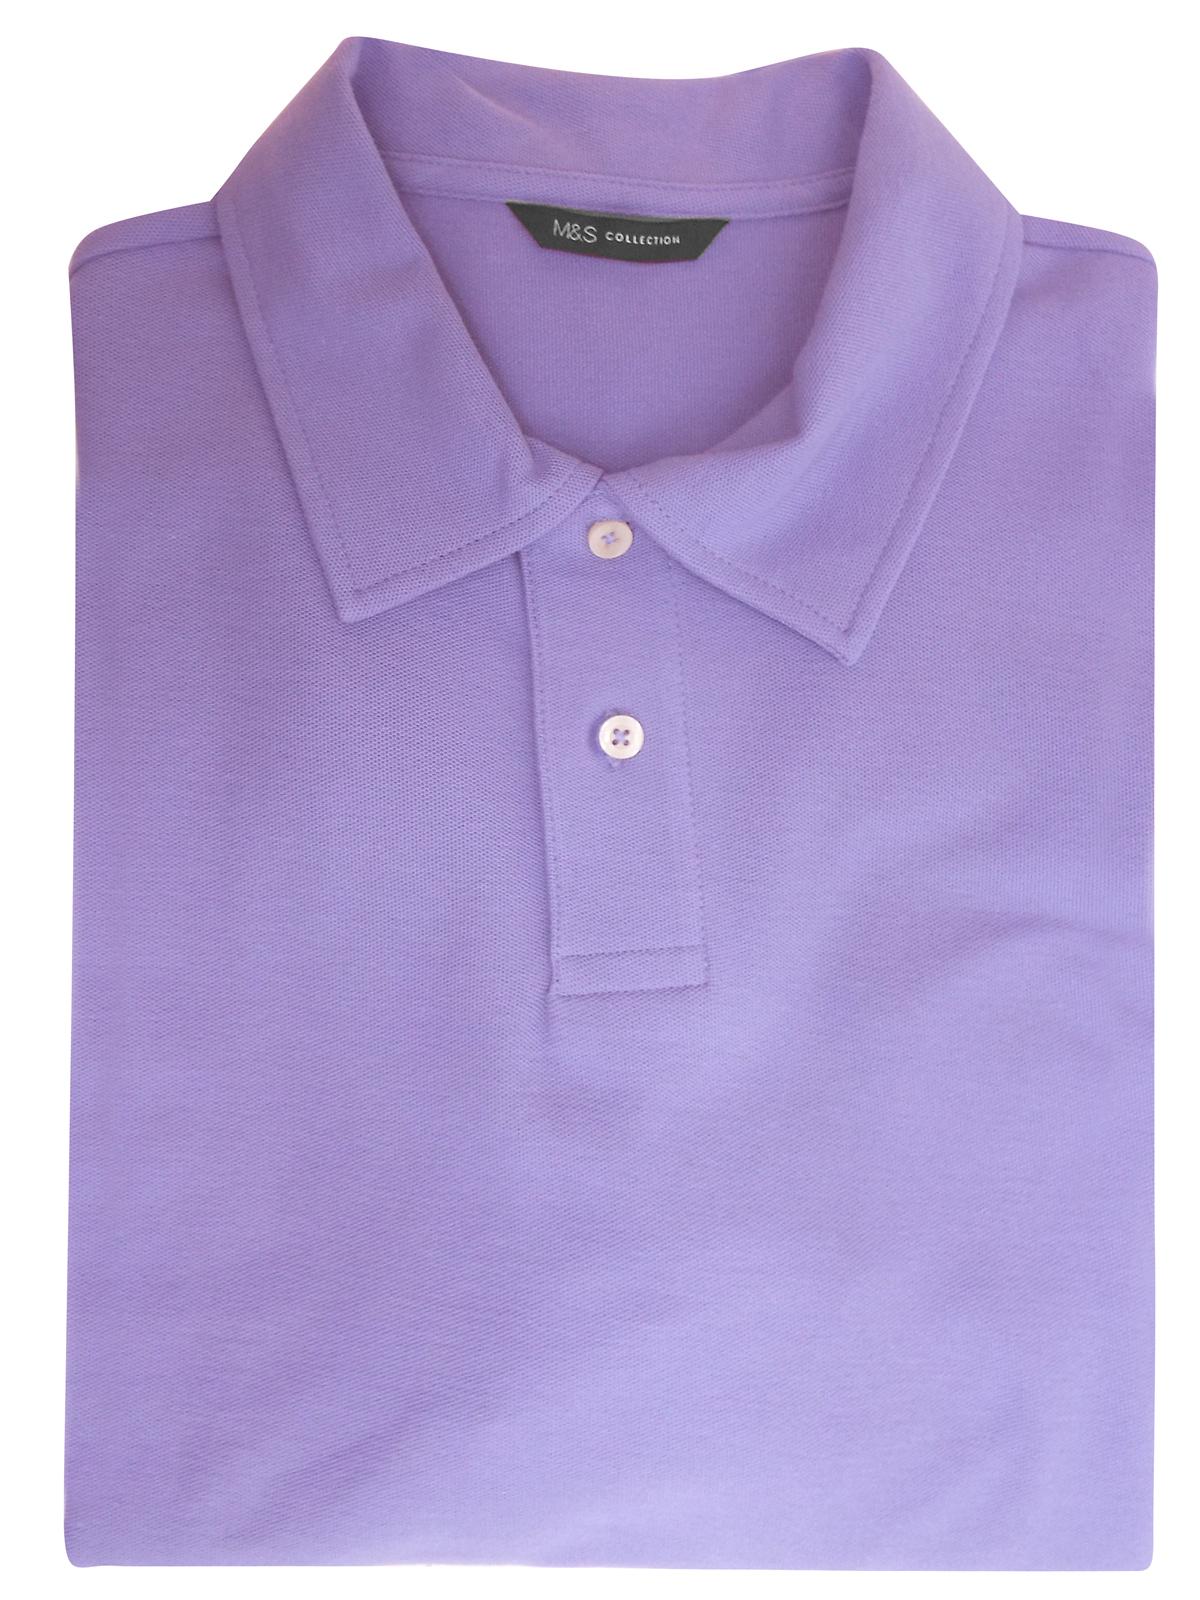 Marks and Spencer - - M&5 LILAC Pure Cotton Polo Shirt - Size Medium to ...